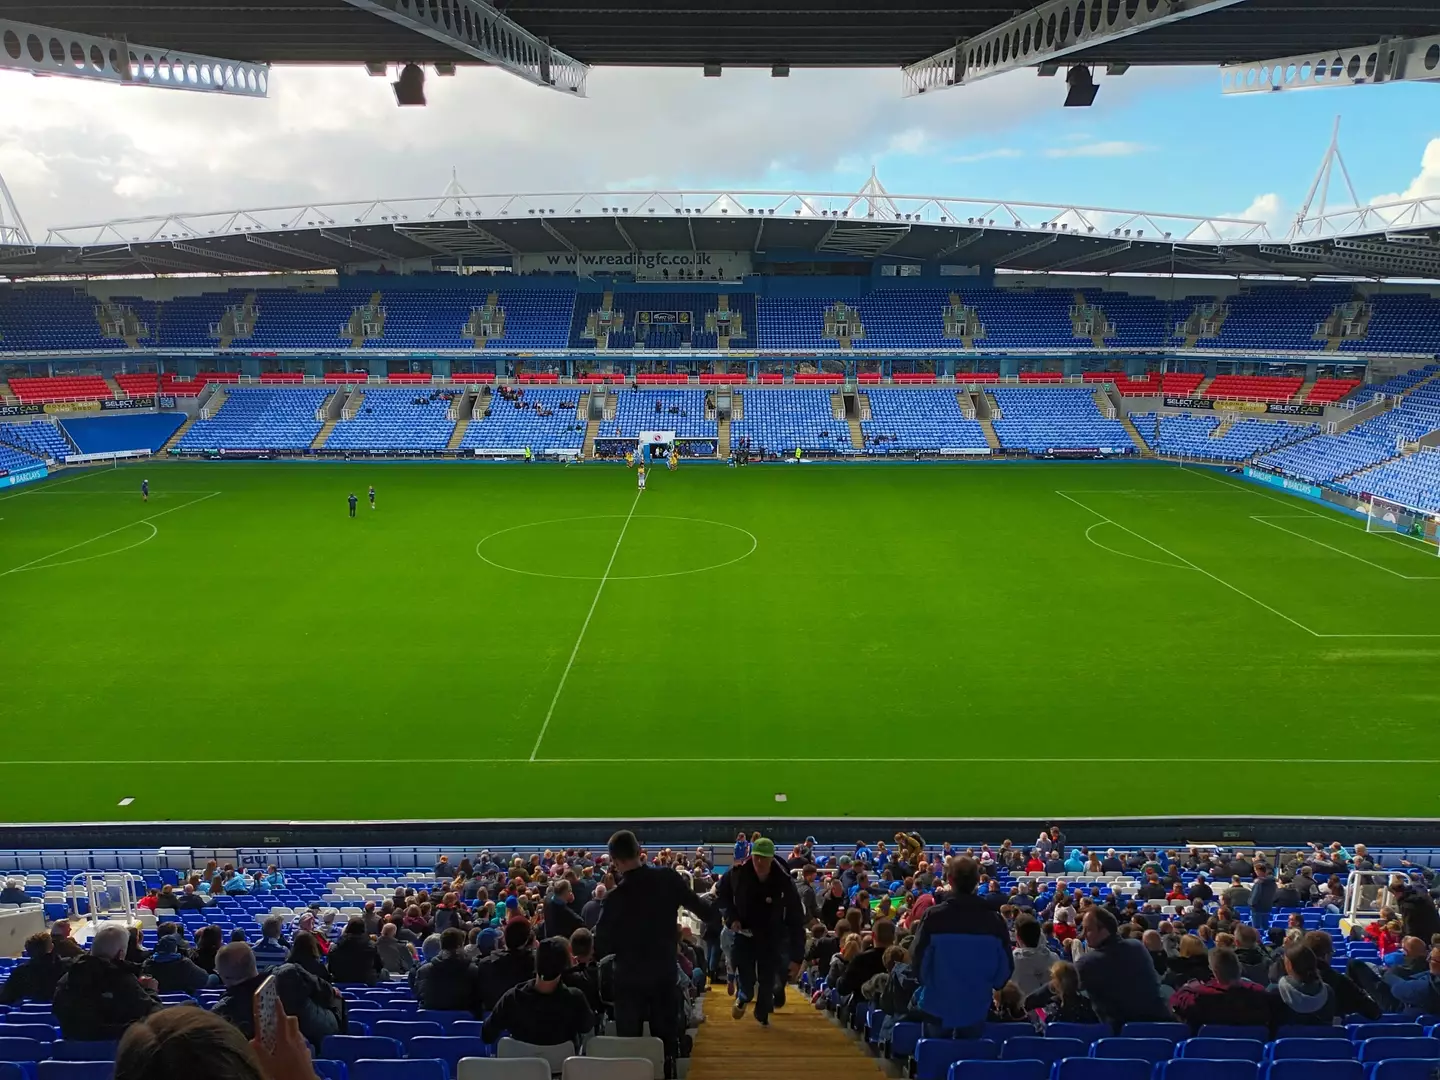 The Madejski Stadium hosted Sunday's WSL fixture between Reading and Leicester City.